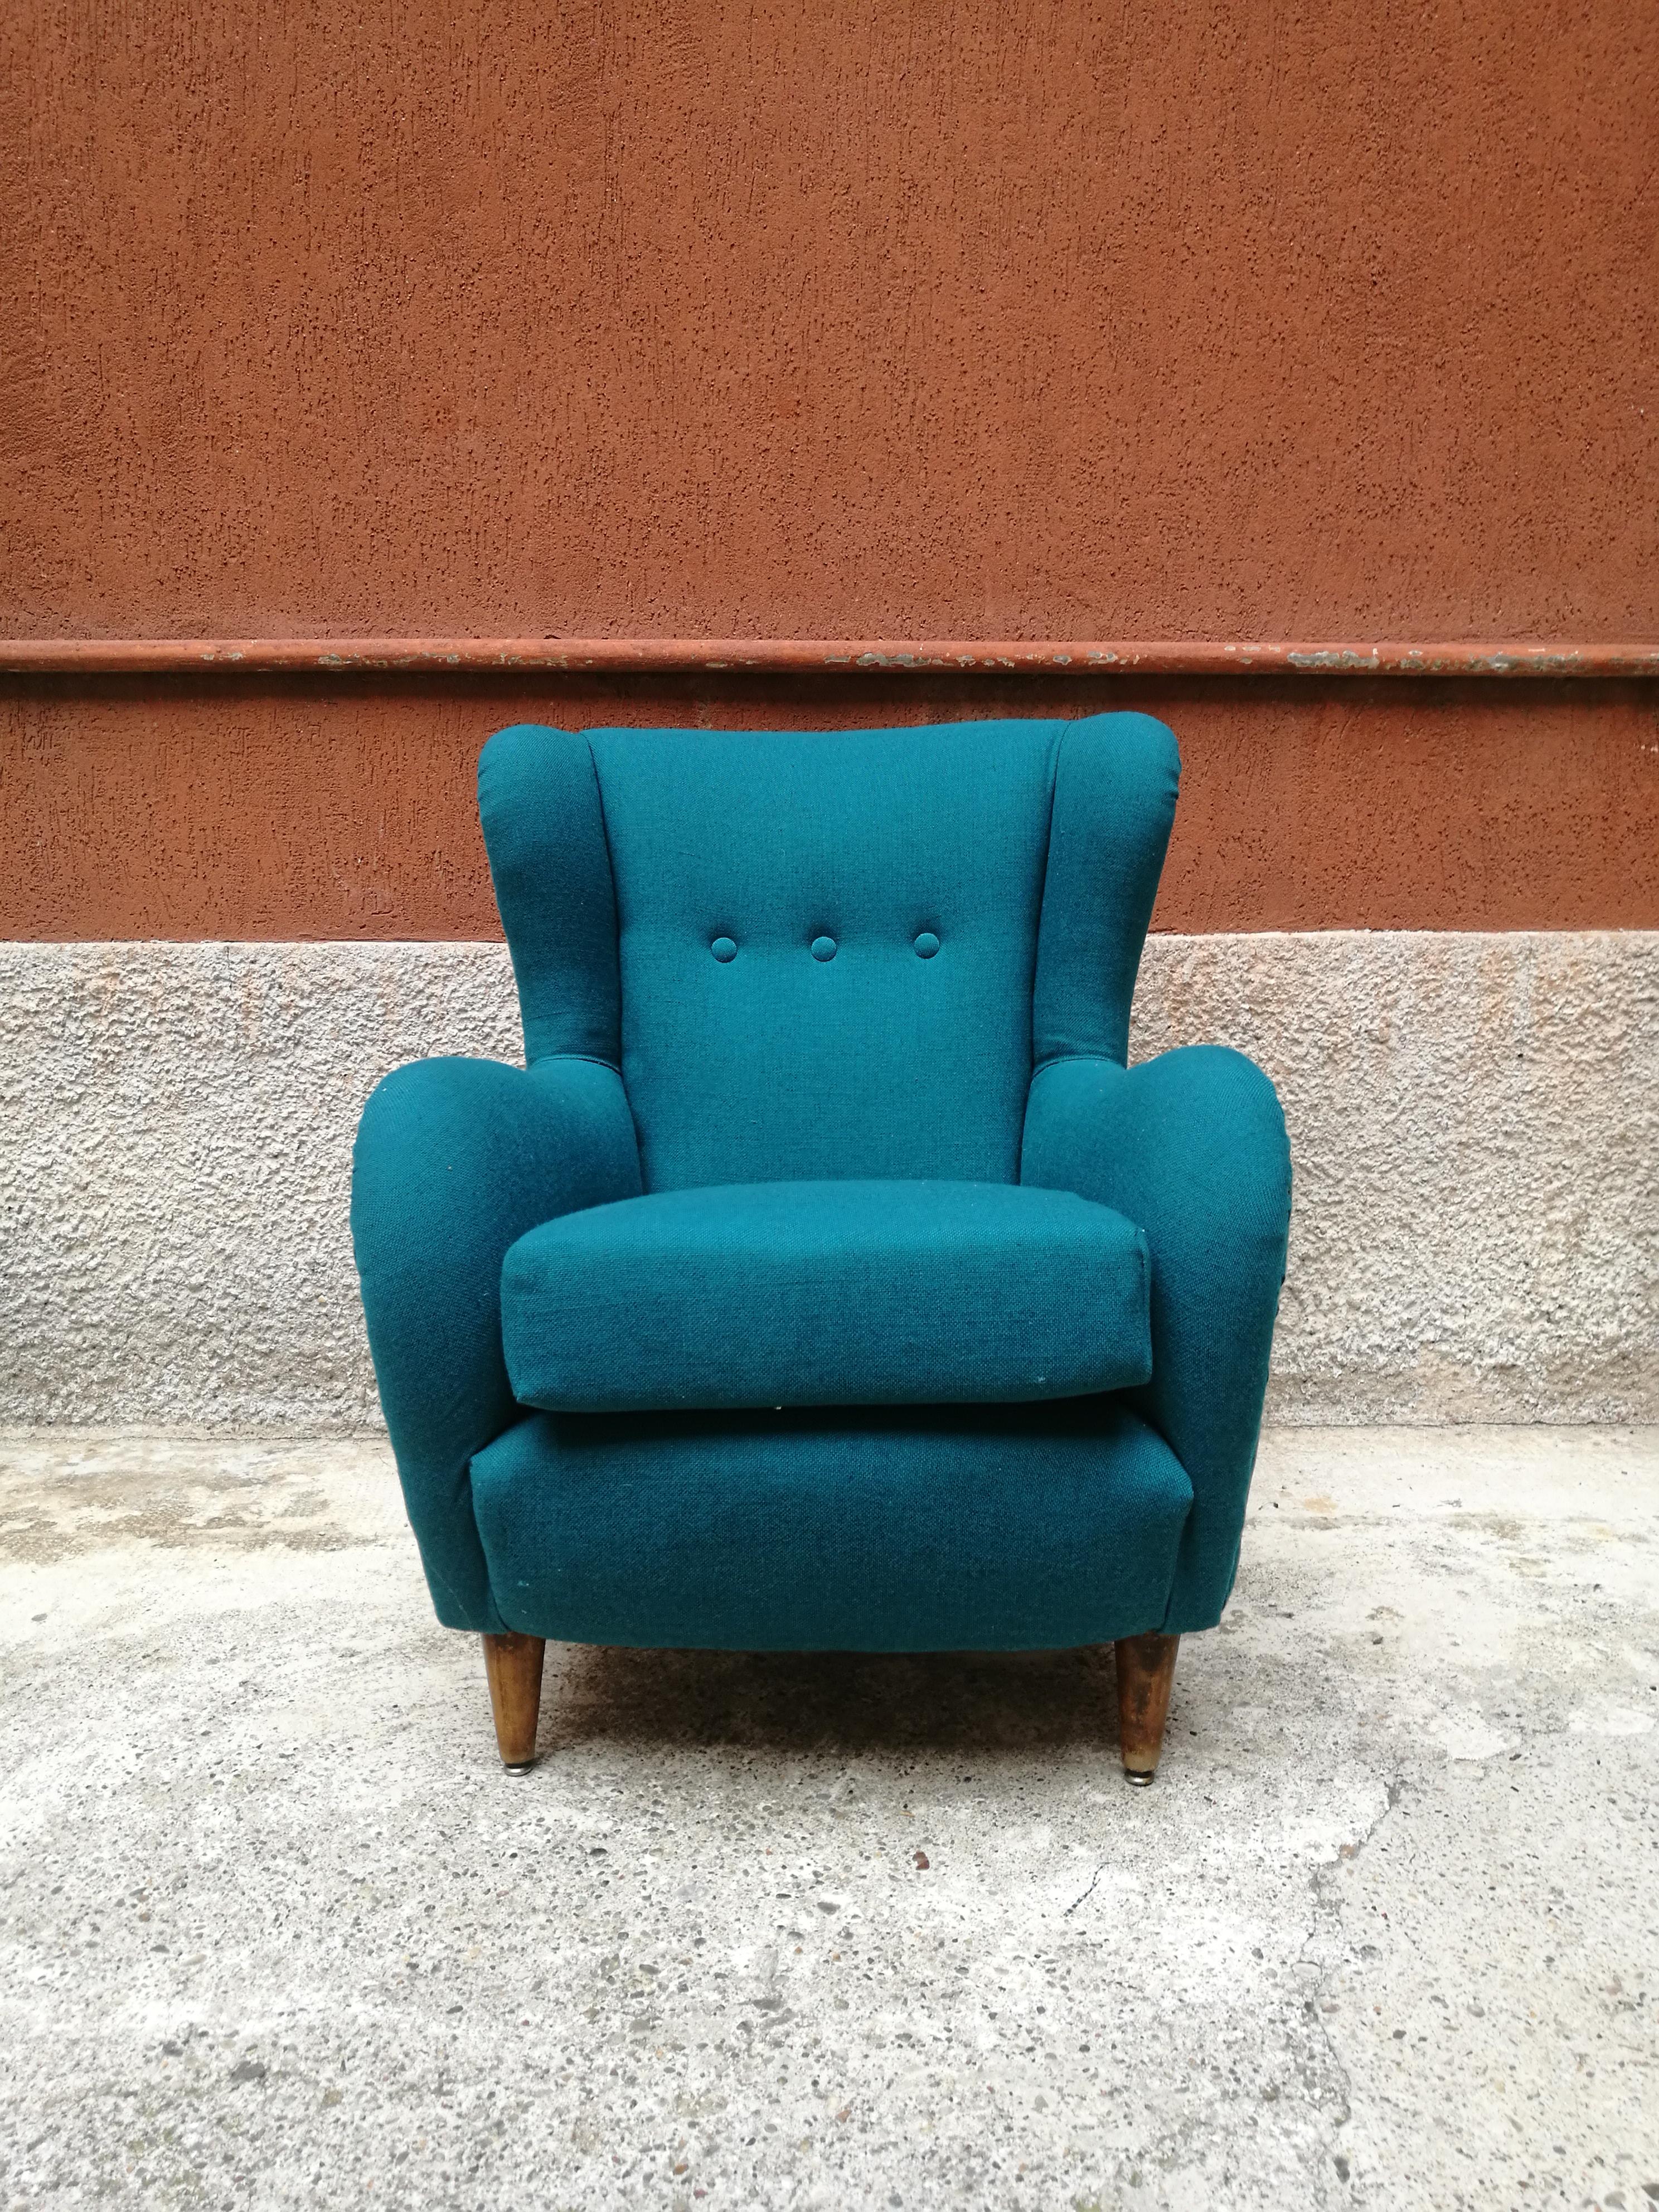 Italian teal-colored cotton and beech armchair, 1960s
Armchair with armset, beech legs and new teal-colored cotton fabric
Perfect conditions.